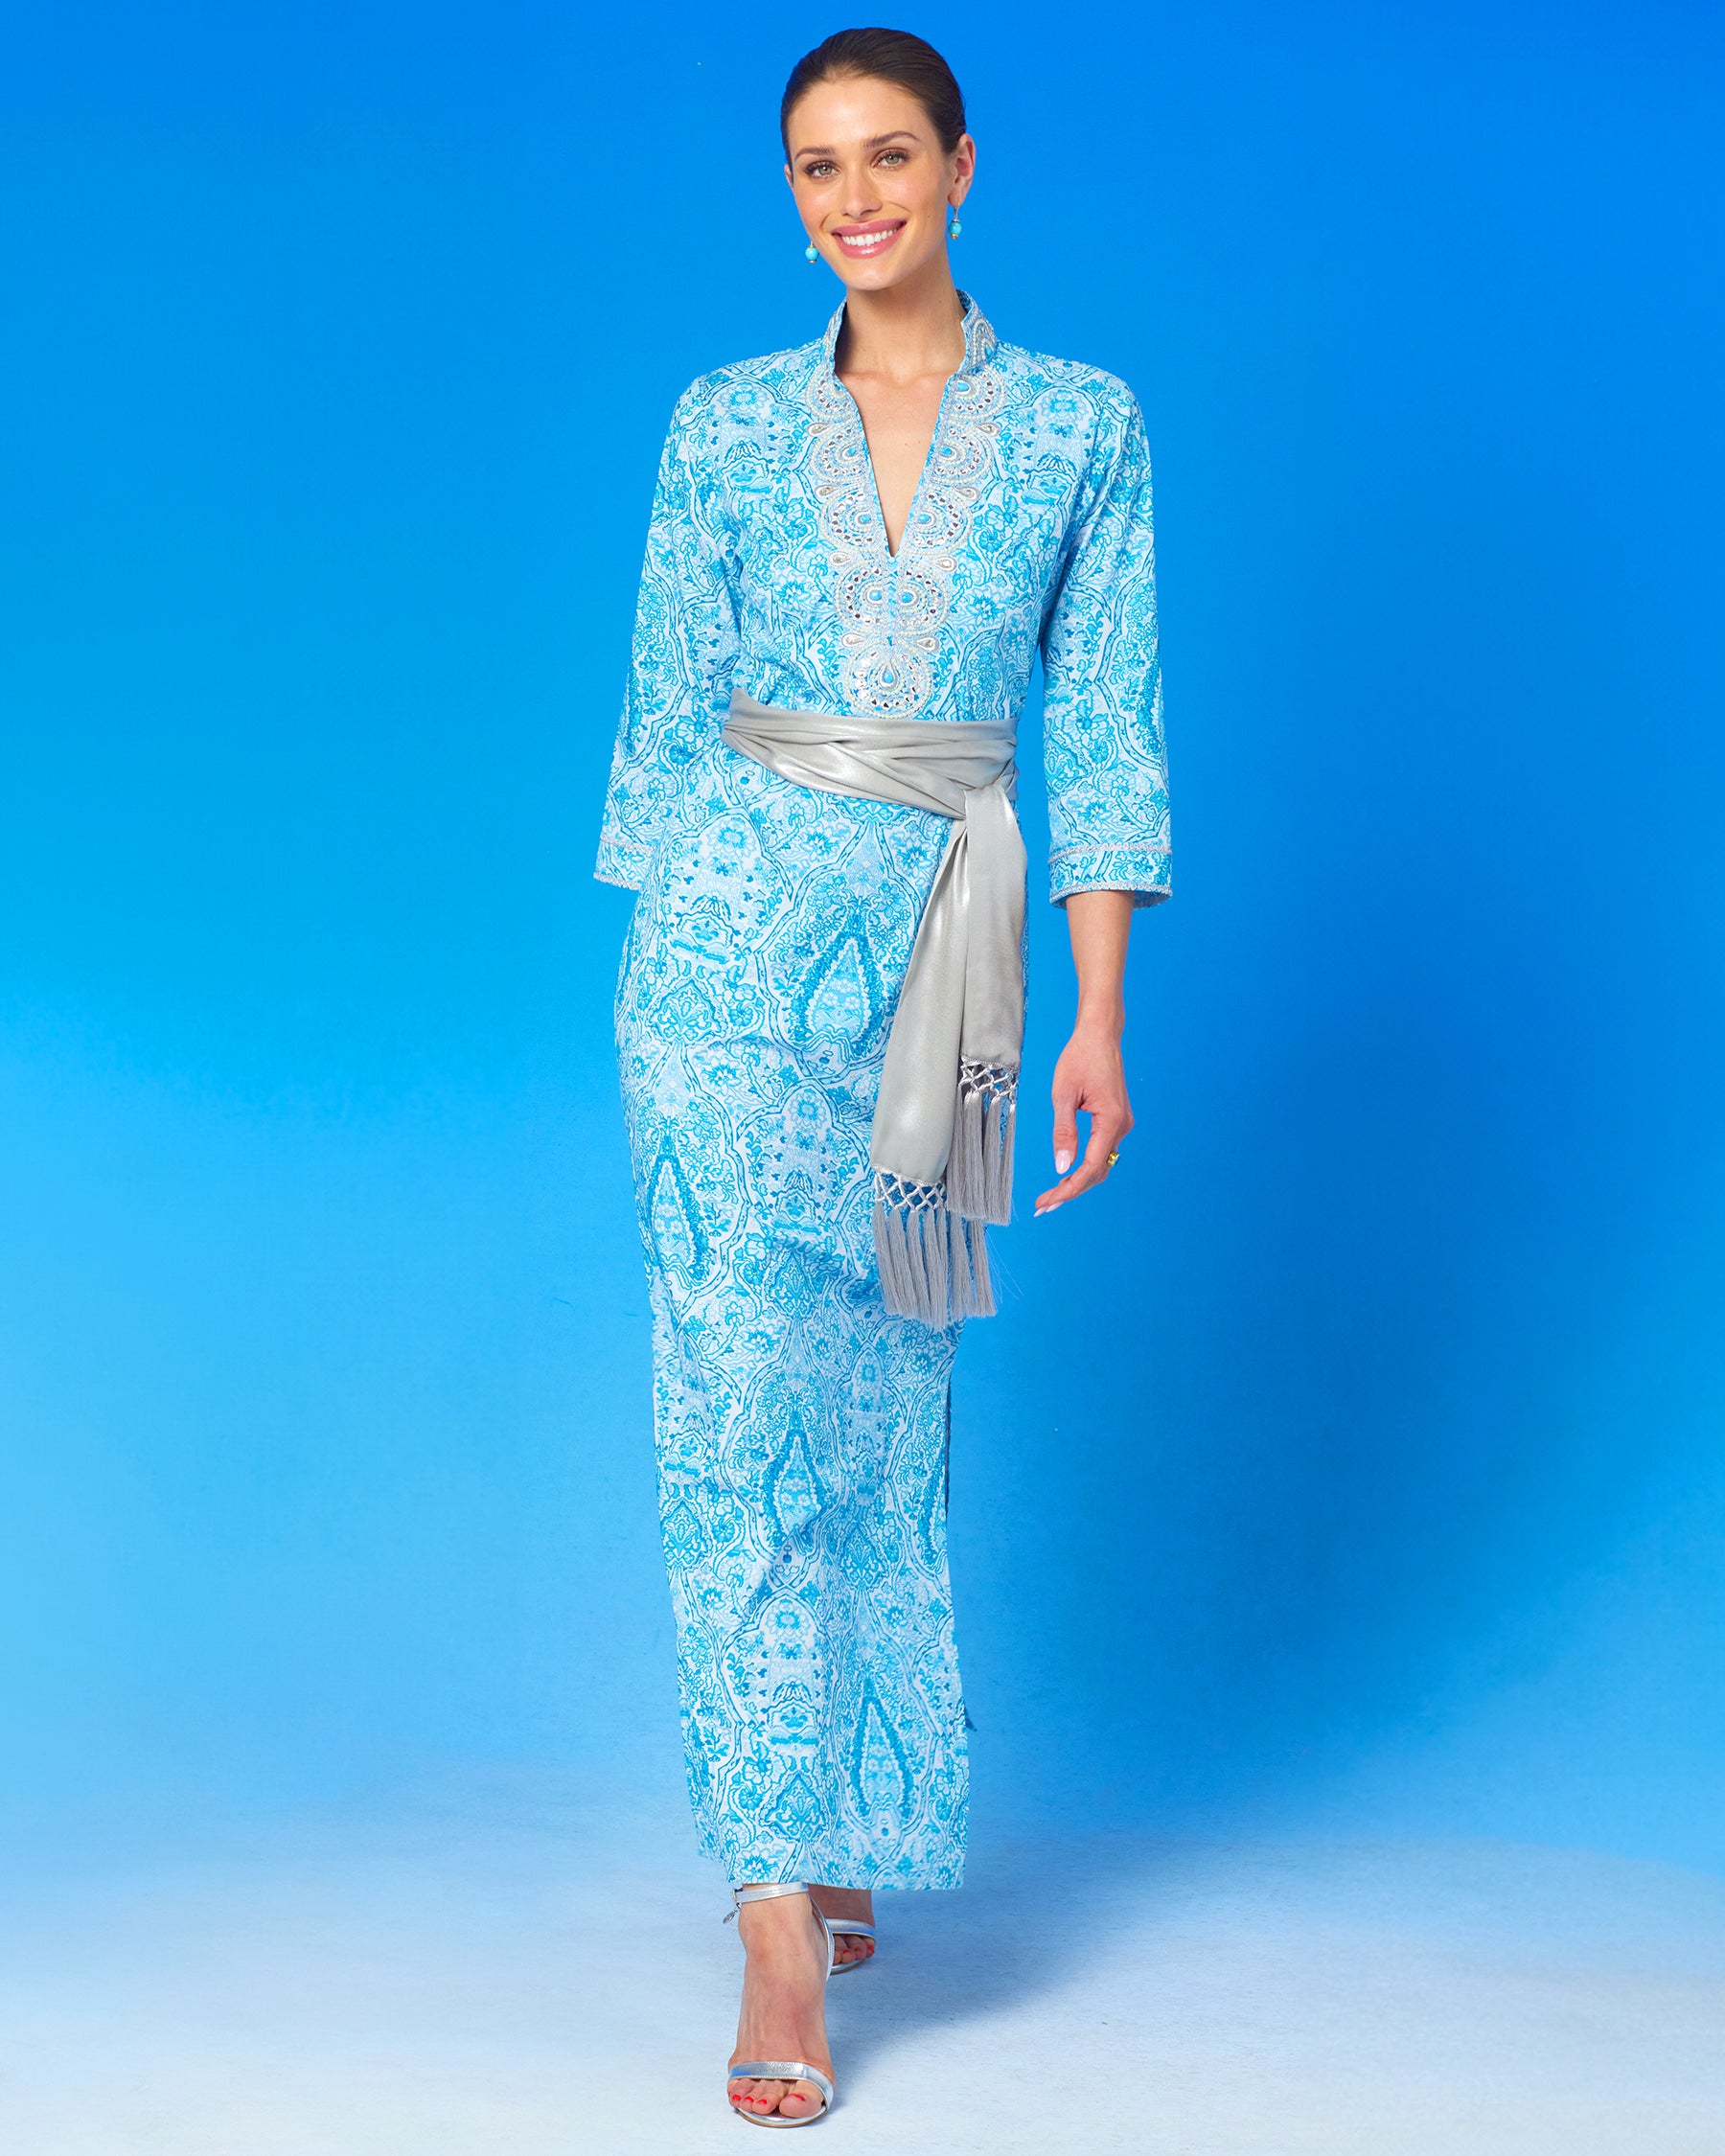 Noor Long Tunic Dress in Turquoise Paisley and Silver Embellishment with waist cinched with the Cosima Silver Sash Belt-front view walking